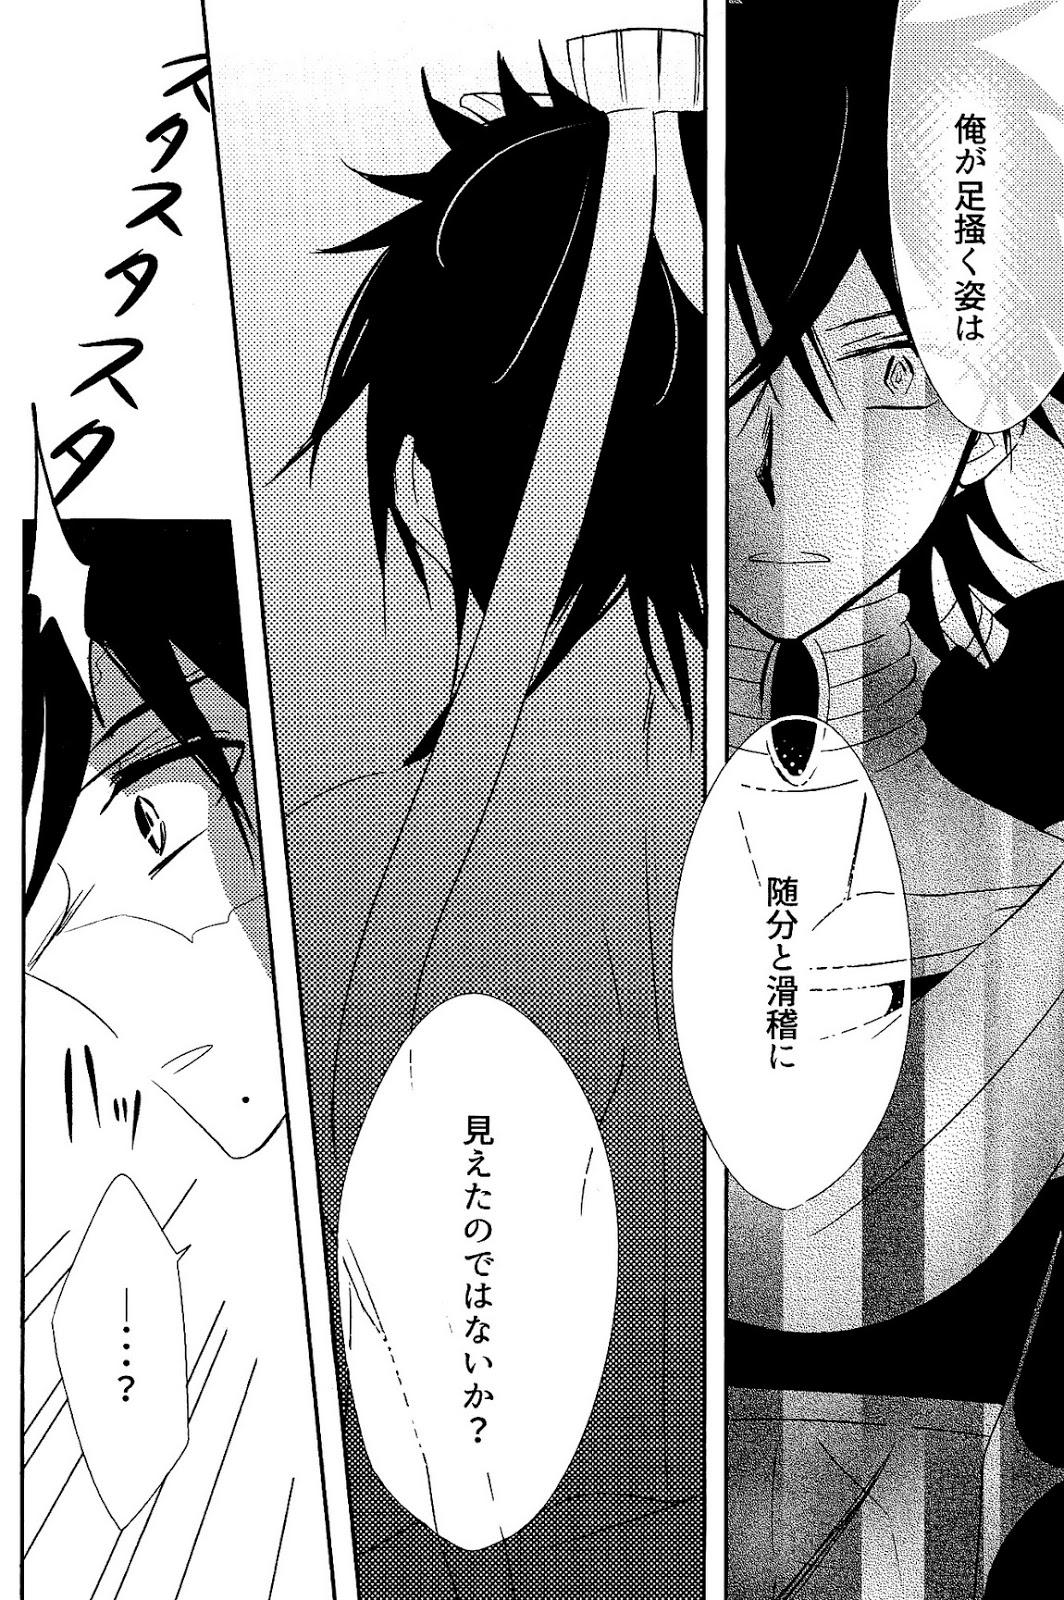 Girls One after another ―Are Ato ni Saku Hana― - Magi the labyrinth of magic Alternative - Page 11